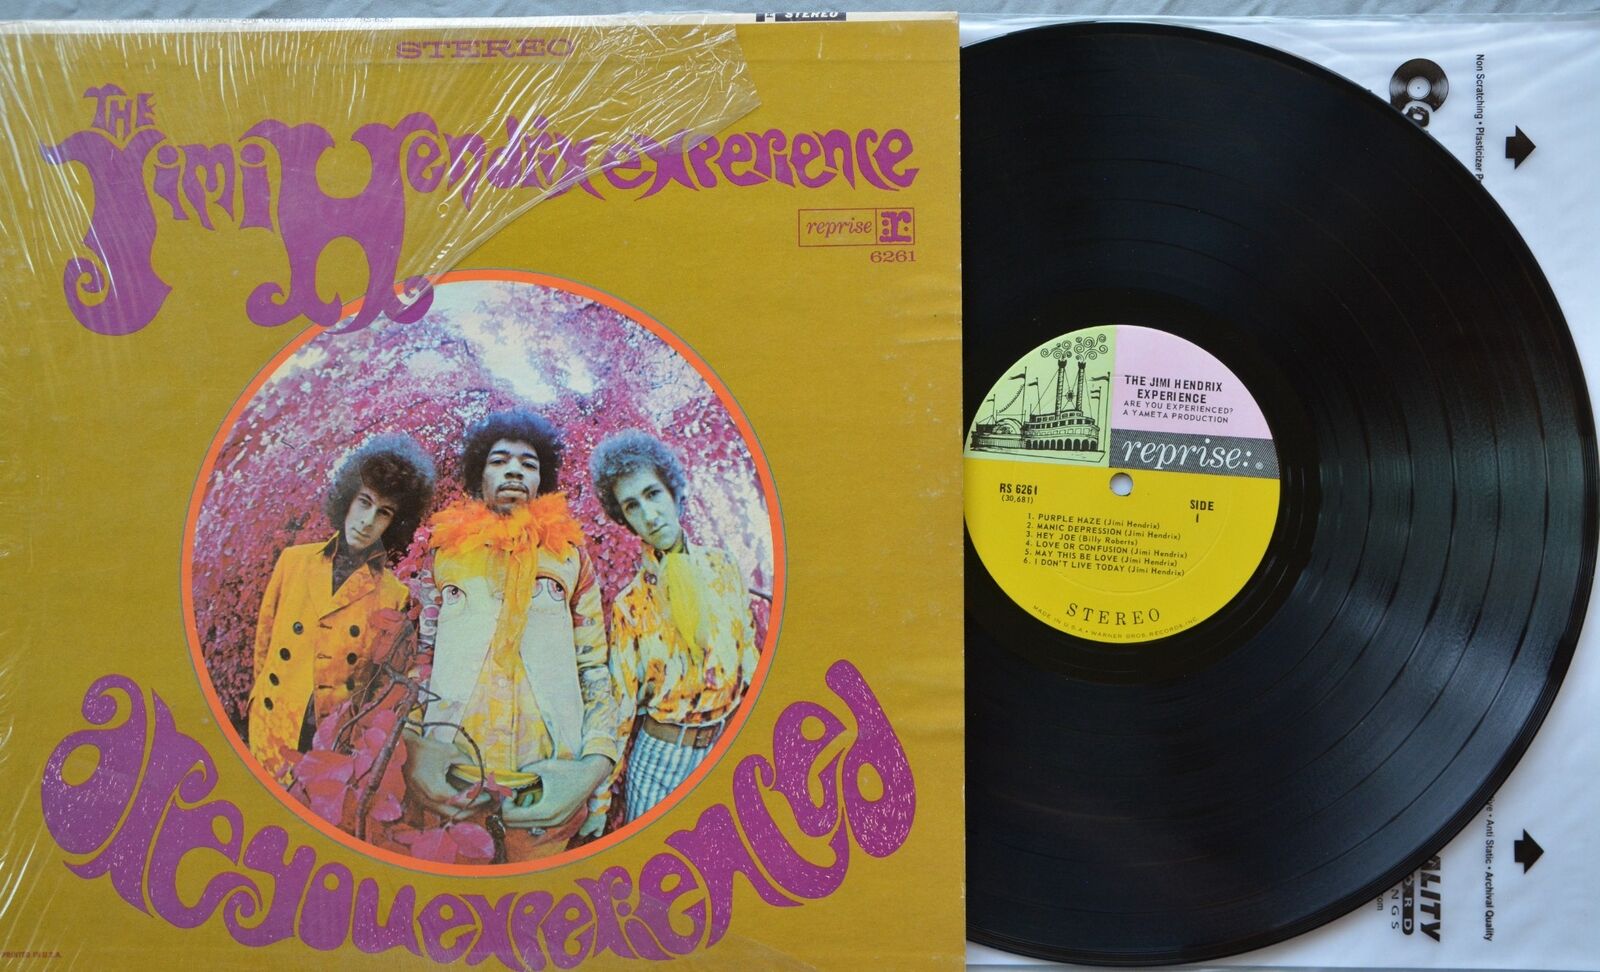 Jimi Hendrix Are You Experienced First Press RS-6041 1967 vinyl LP EX+ shrink